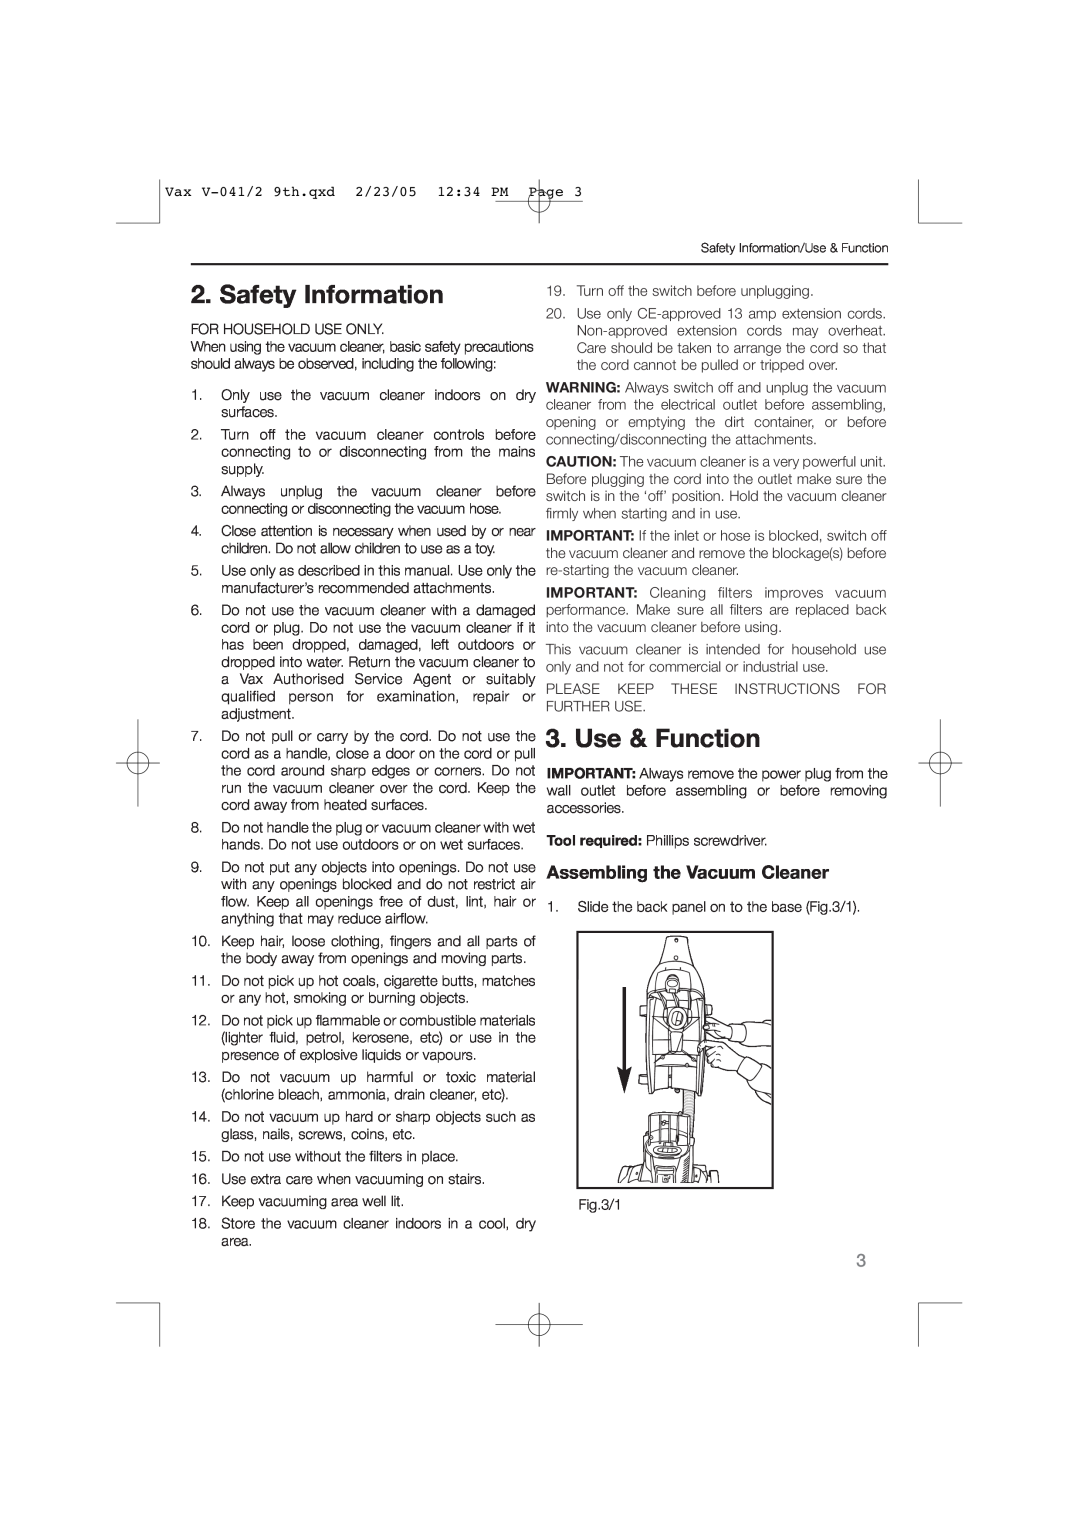 Vax V-041, V-042 instruction manual Safety Information, Use & Function, Assembling the Vacuum Cleaner 